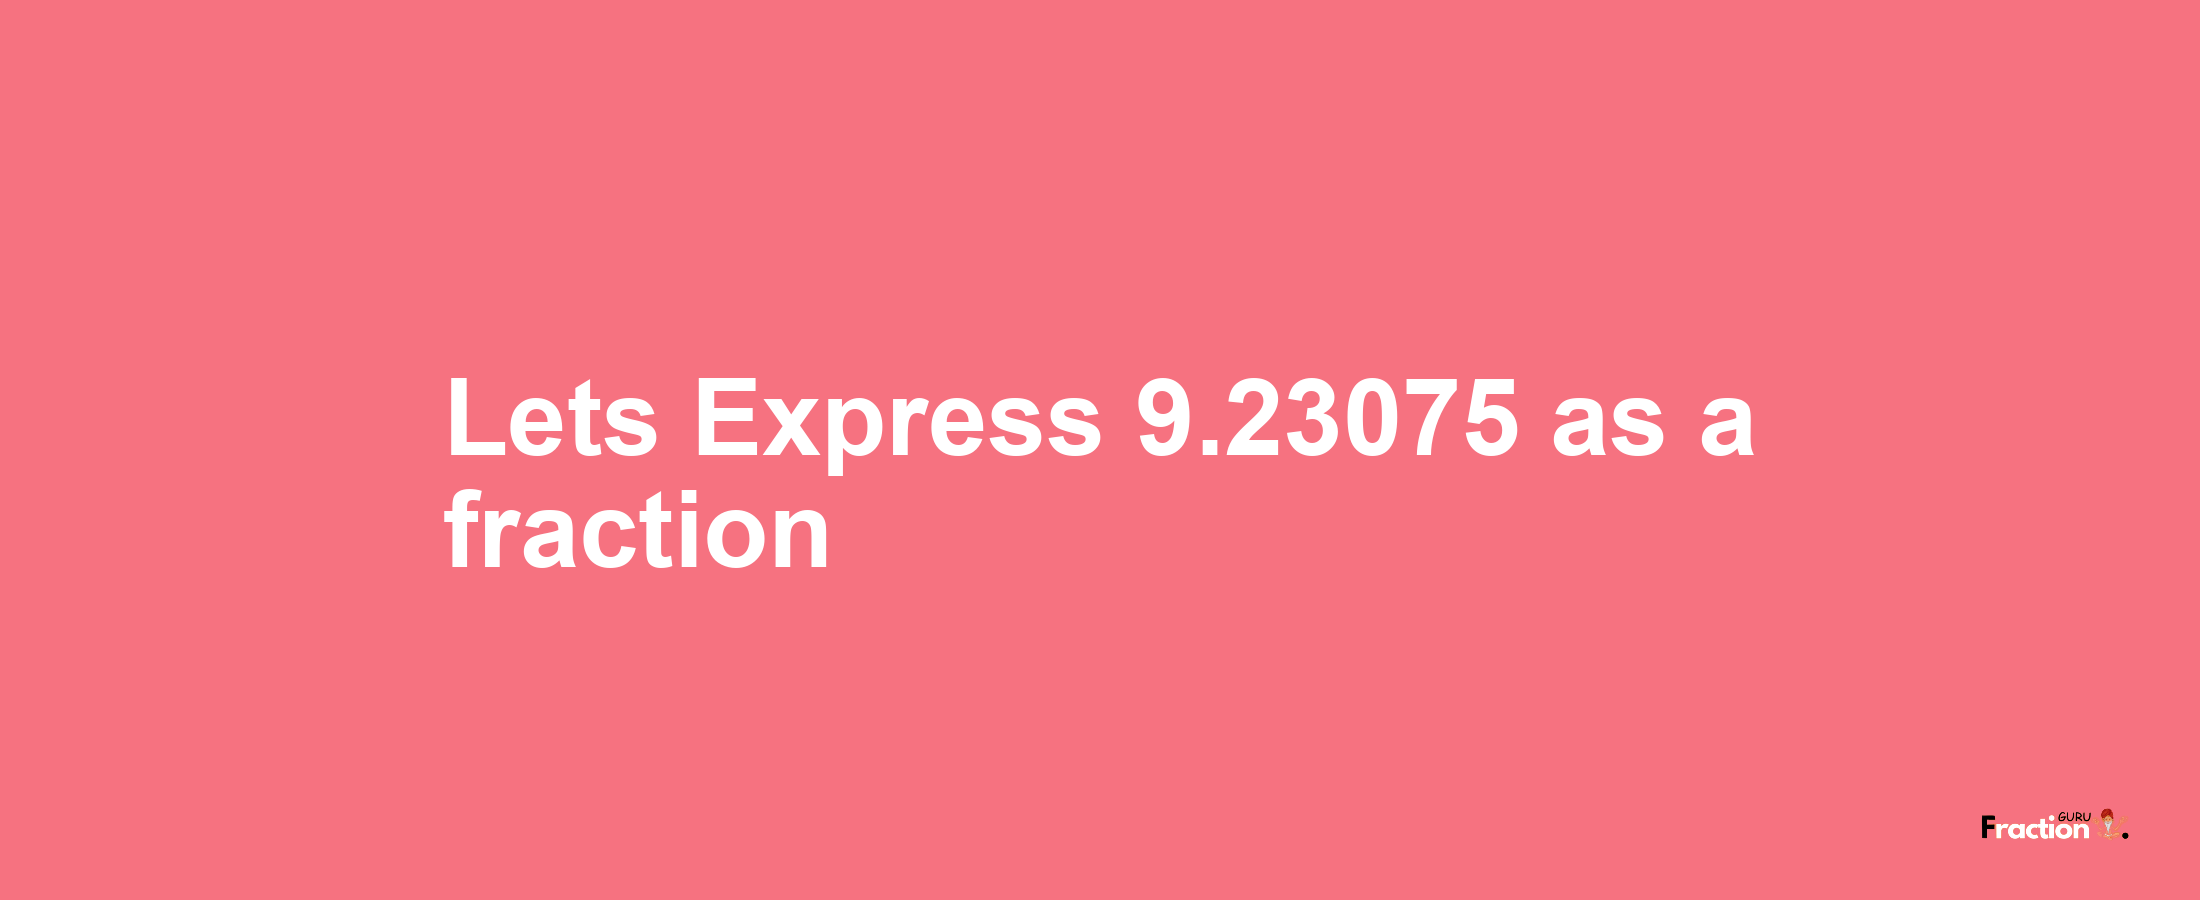 Lets Express 9.23075 as afraction